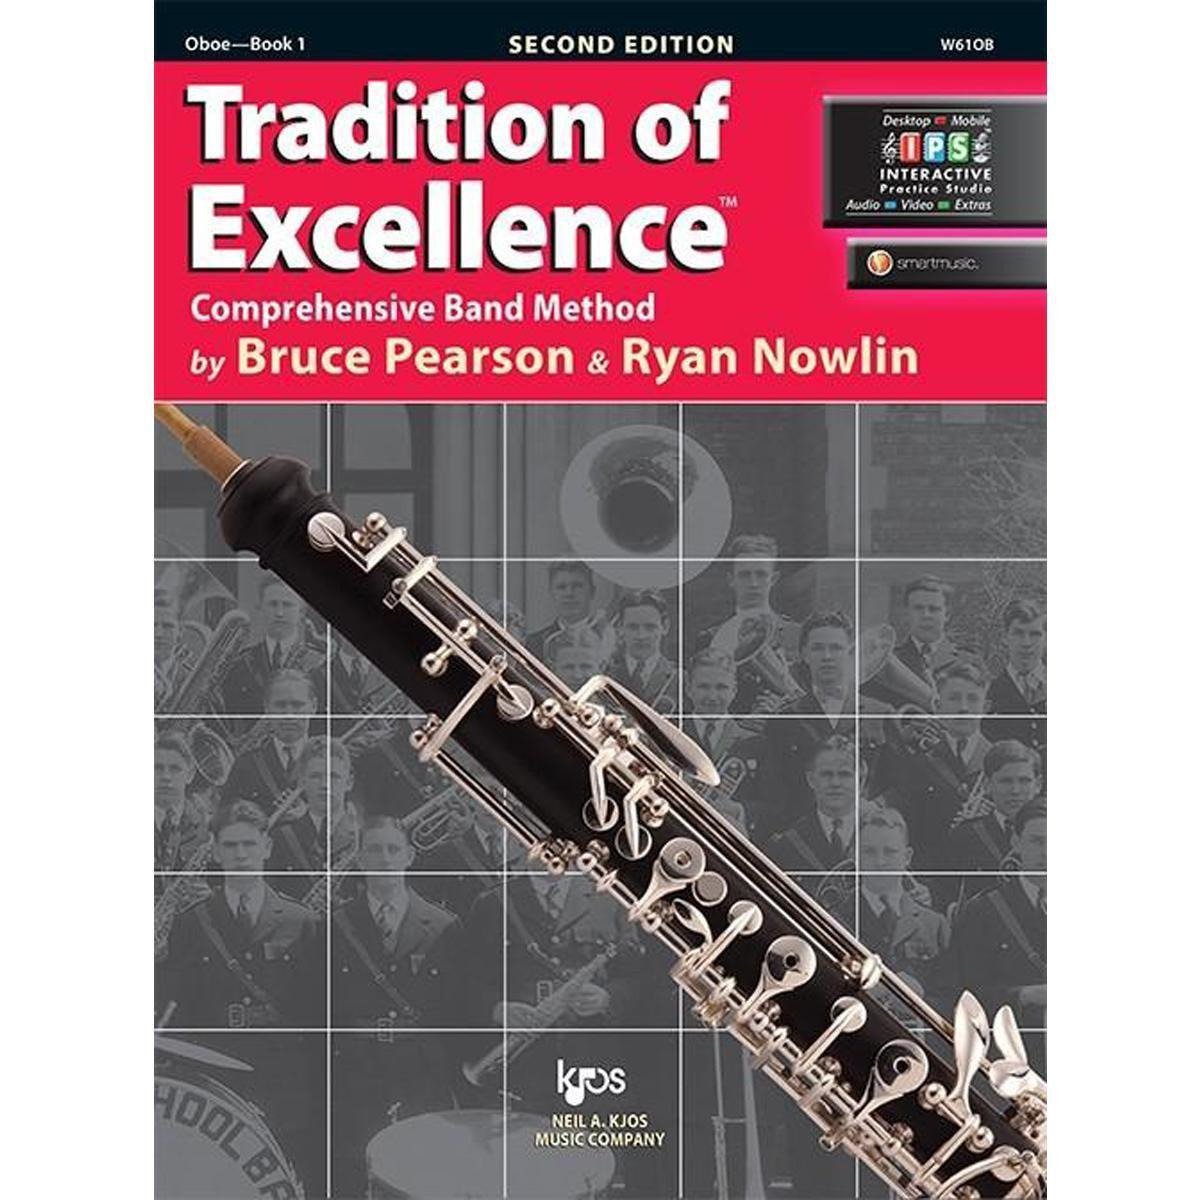 Tradition of Excellence Book 1-Oboe-Andy's Music